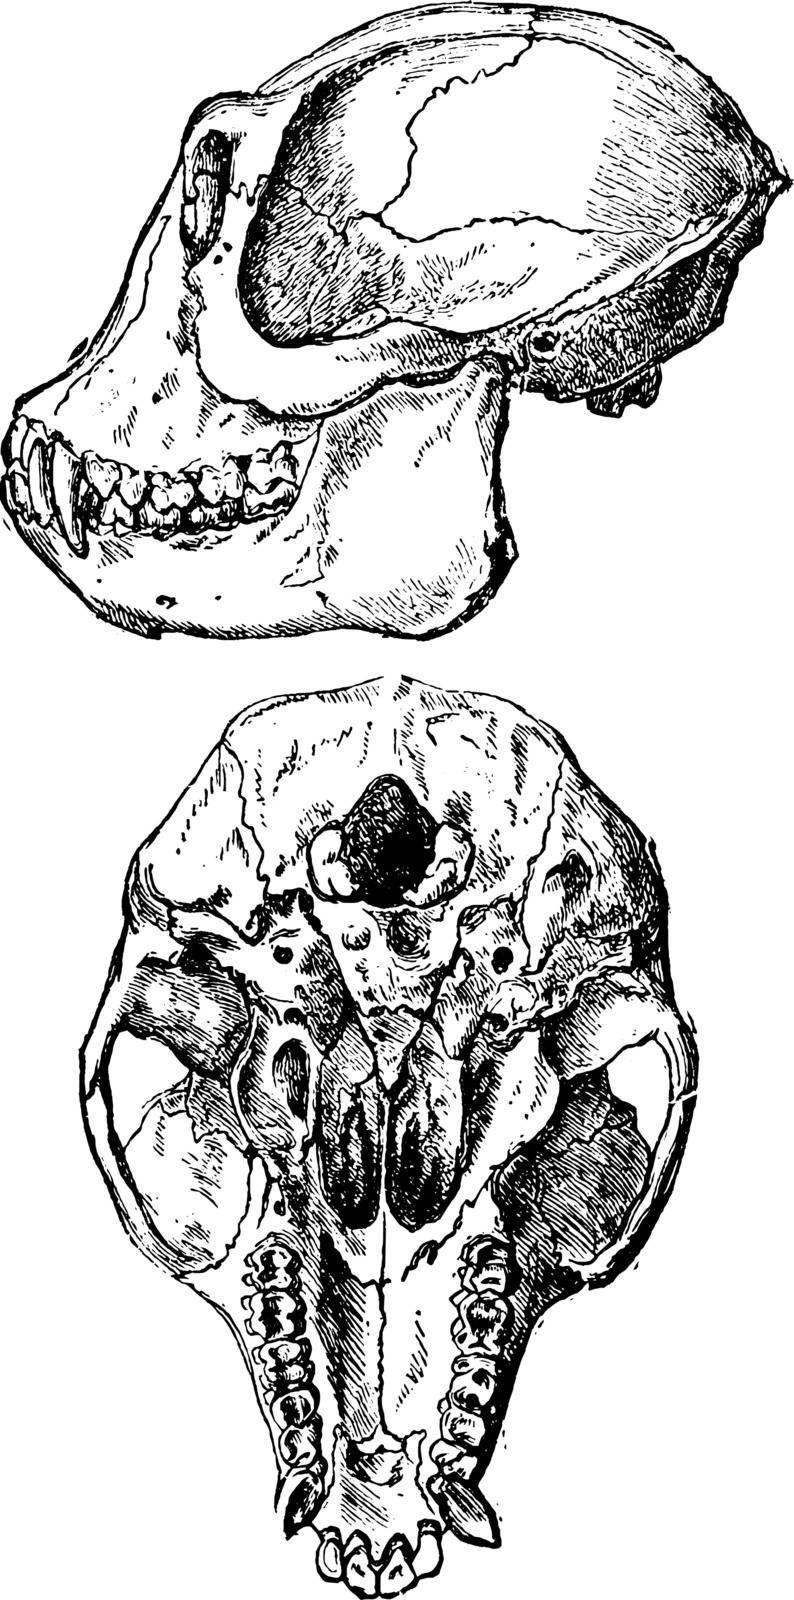 Ape Skull where apes are in the family Hominidae which include gorillas, vintage line drawing or engraving illustration.